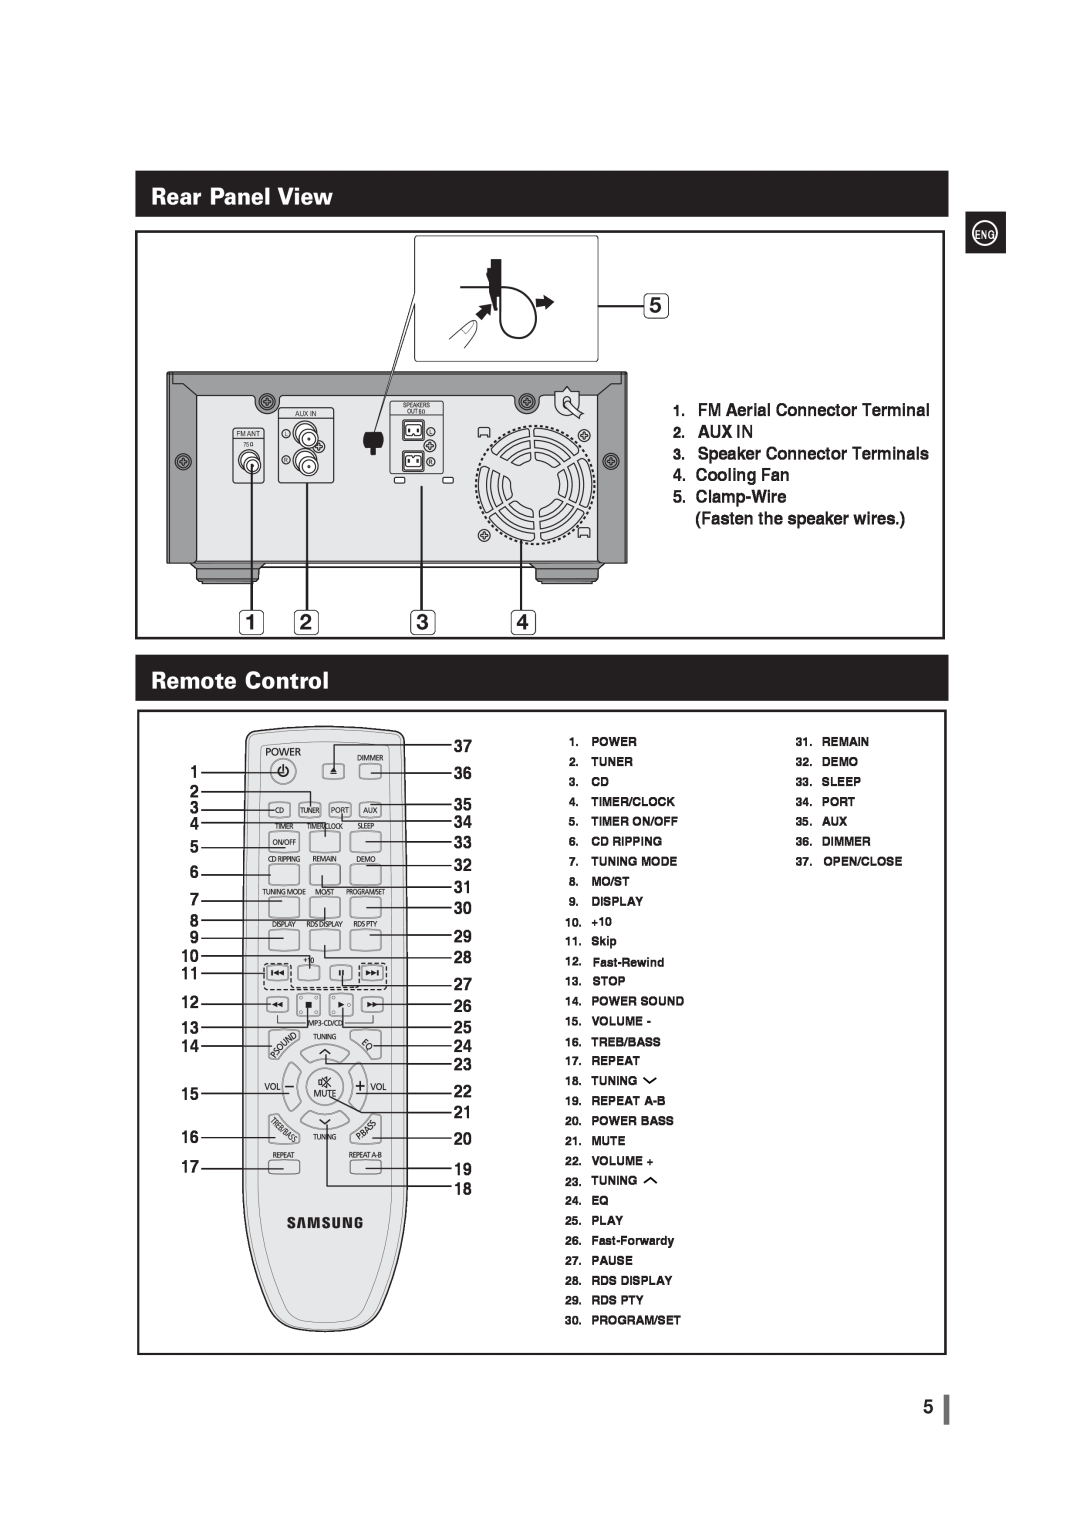 Samsung MM-G35 user manual Rear Panel View, Remote Control 